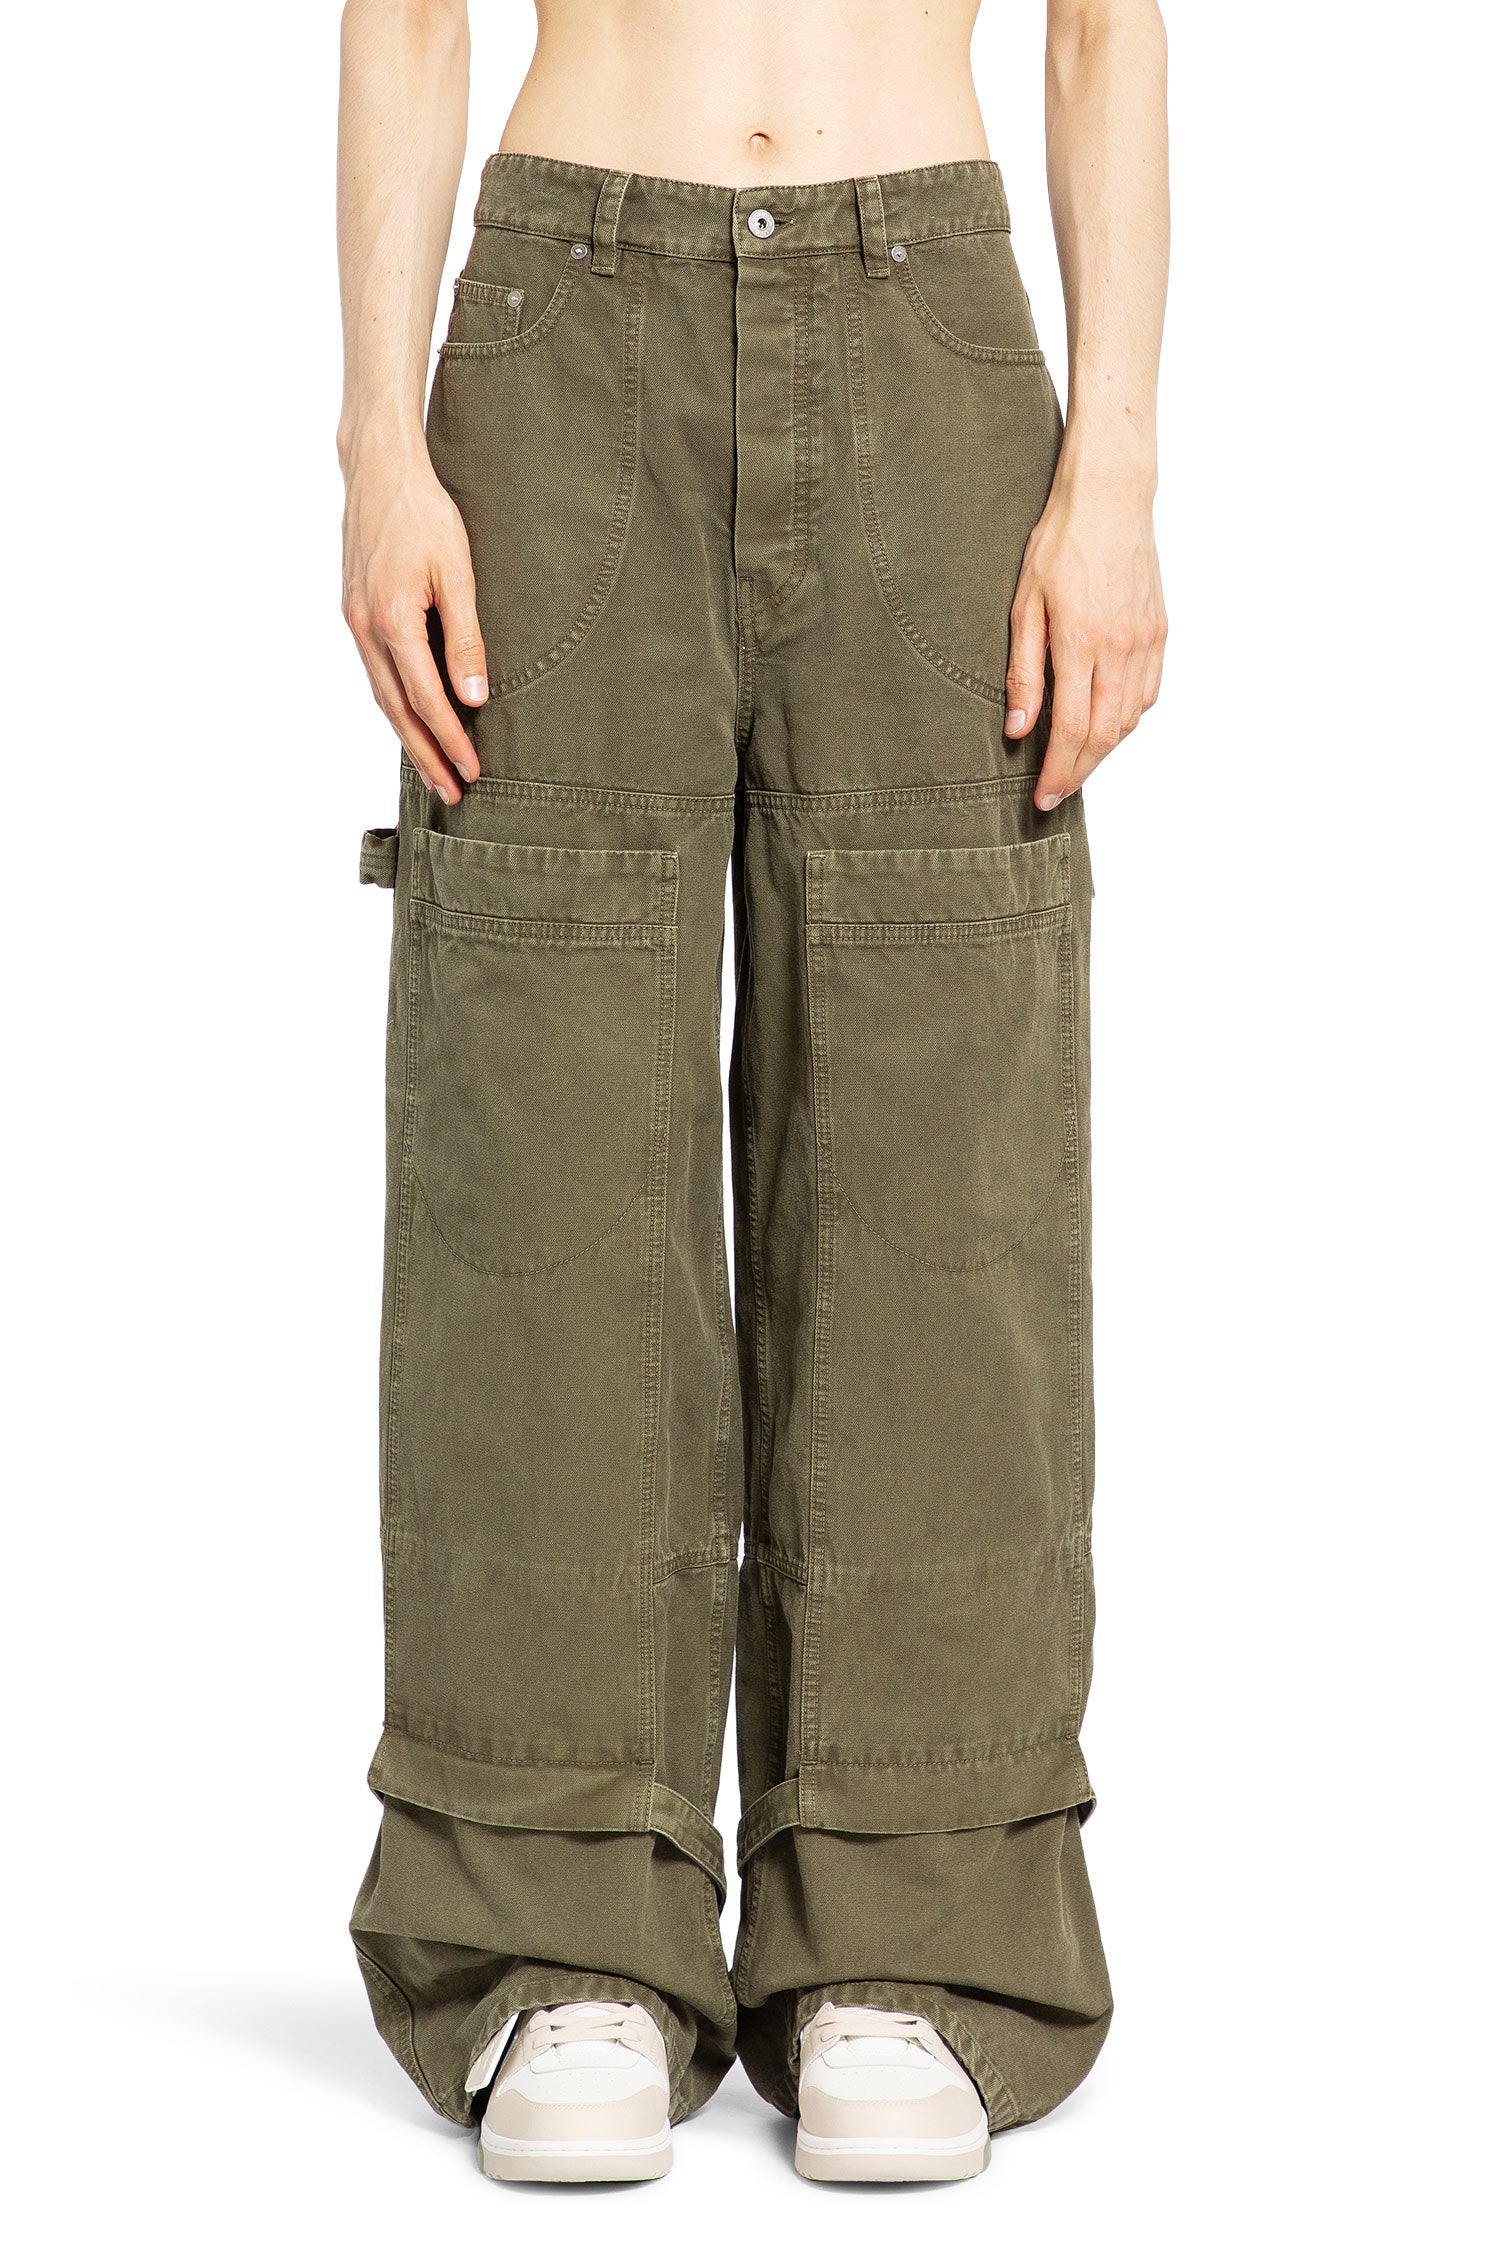 OFF-WHITE MAN GREEN JEANS